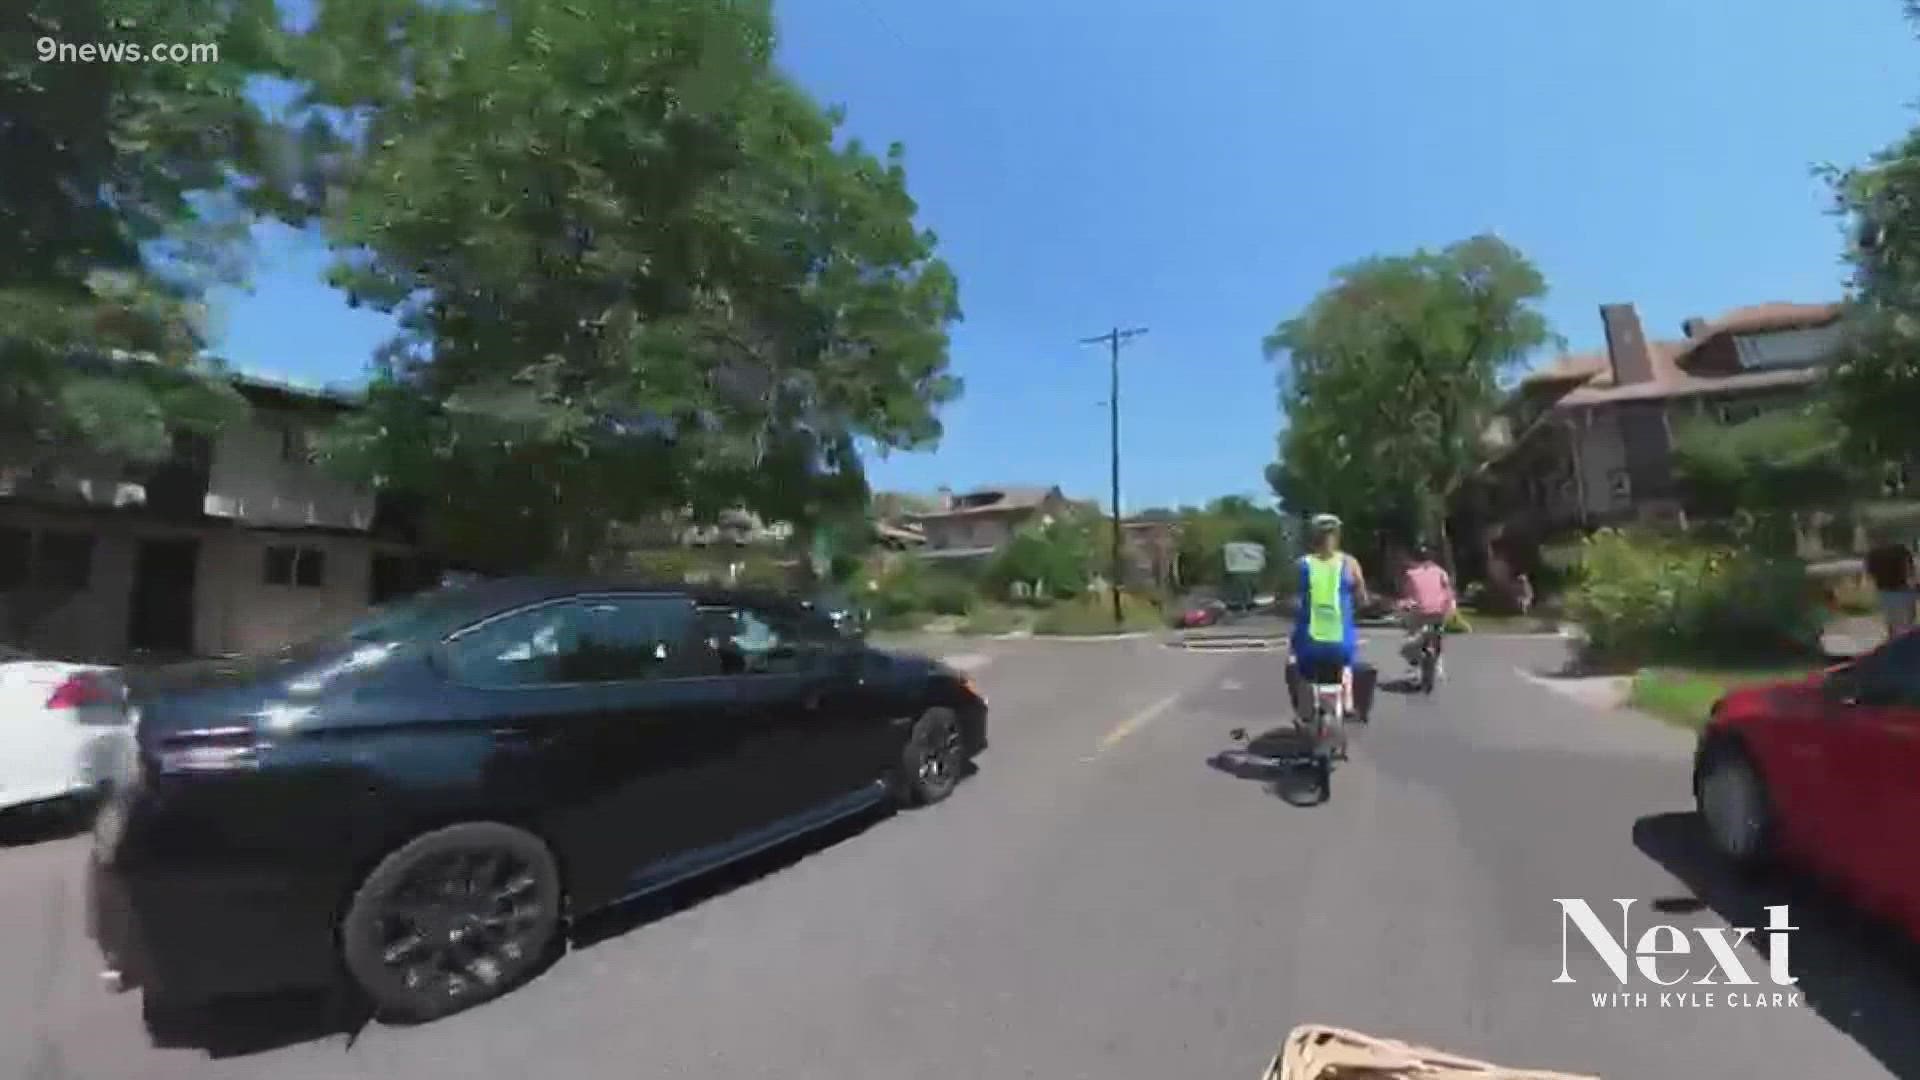 Denver said it's getting rid of the shared streets because they're anticipating a return of car traffic.